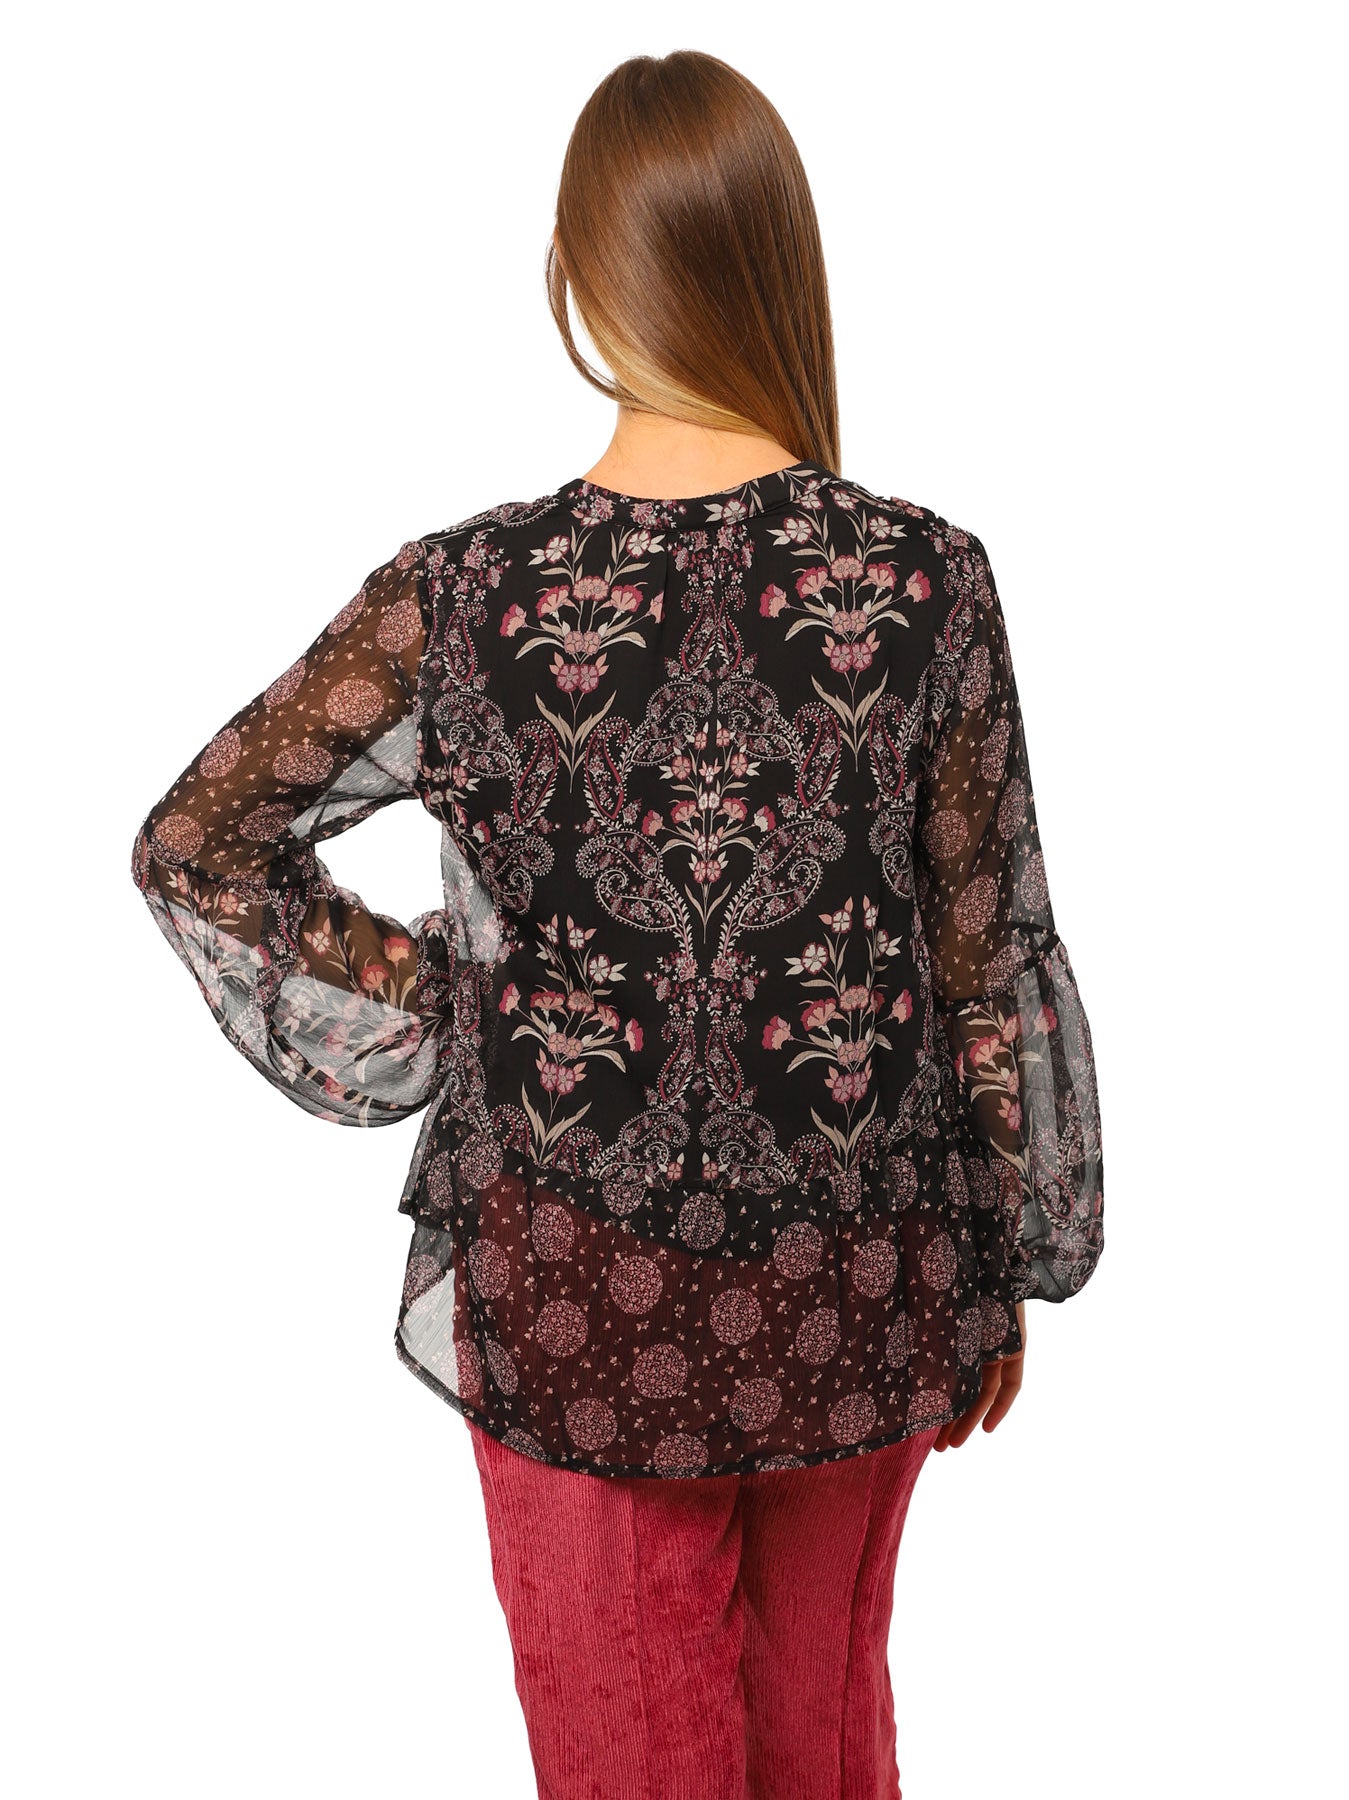 Women's blouse with ethnic pattern